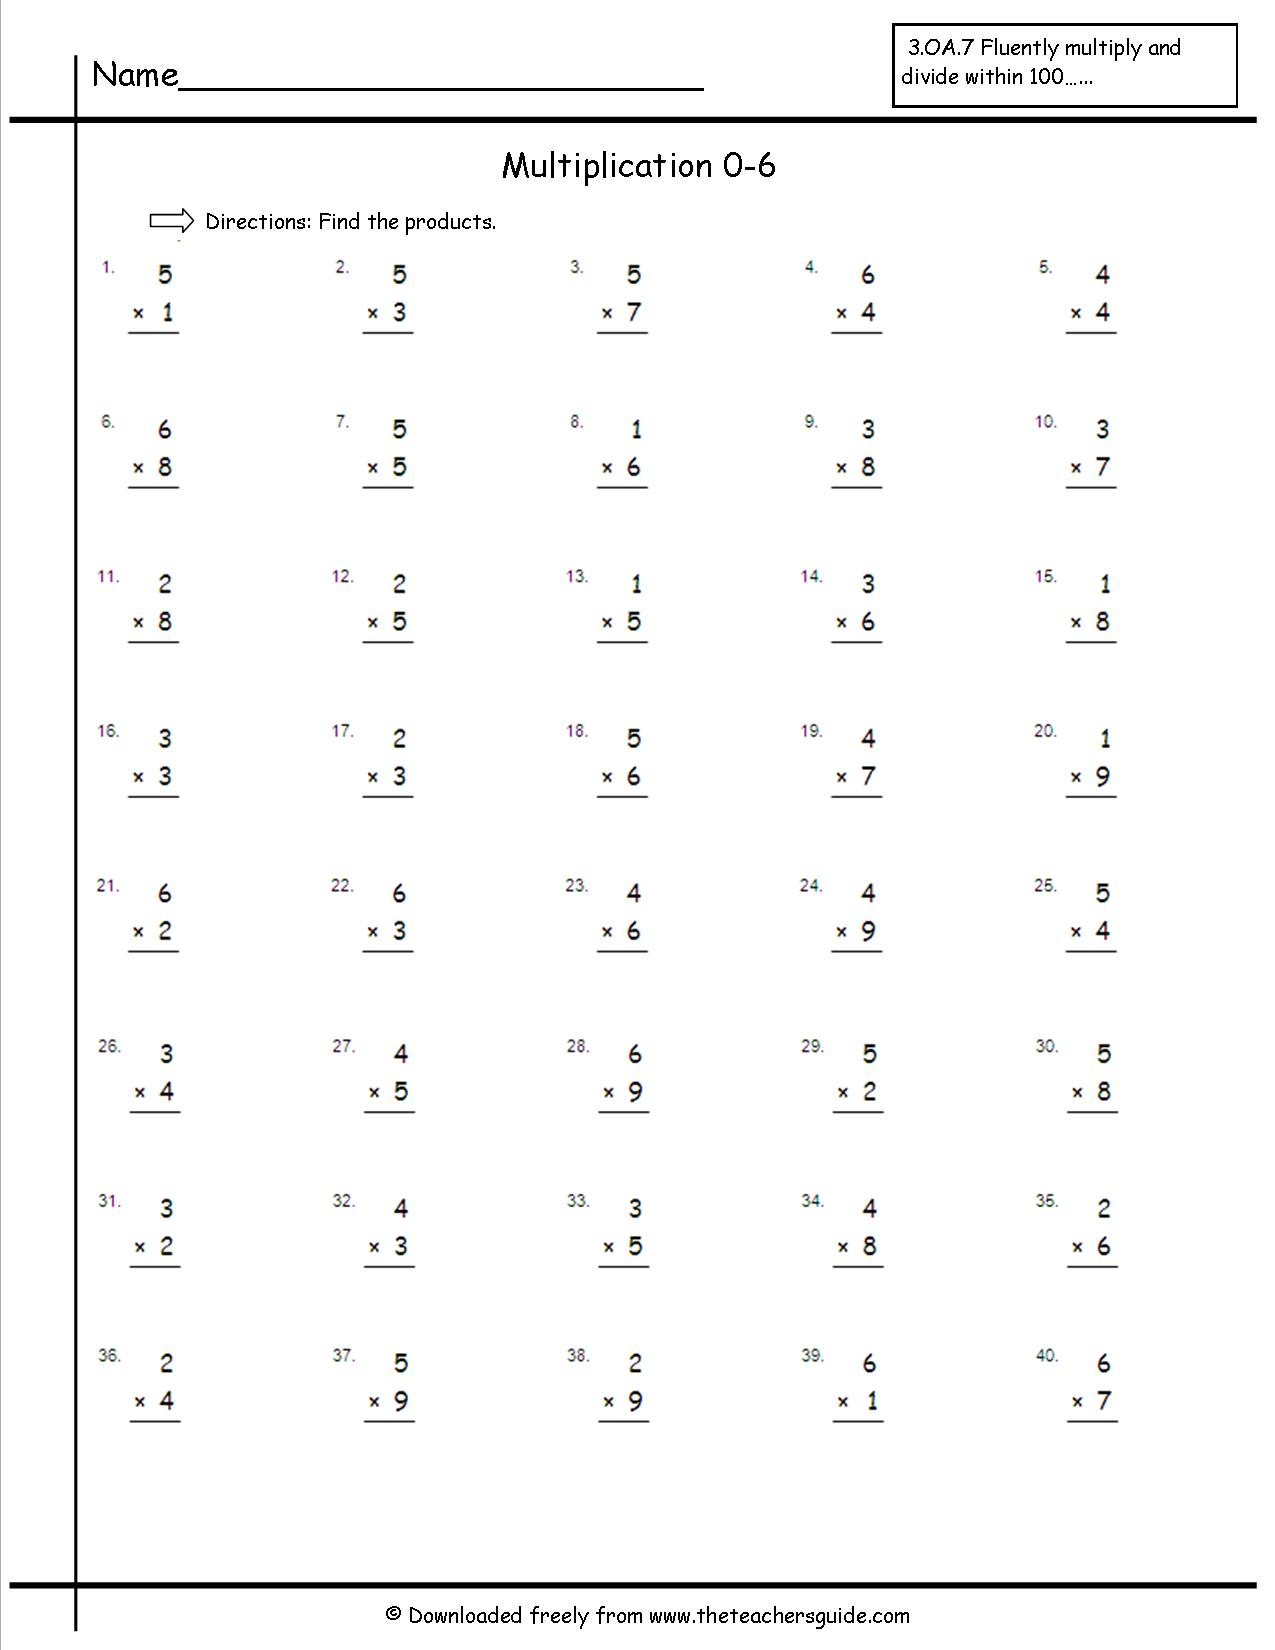 Multiplication Facts Worksheets From The Teacher&amp;#039;s Guide with regard to Printable Multiplication Worksheets 0-4